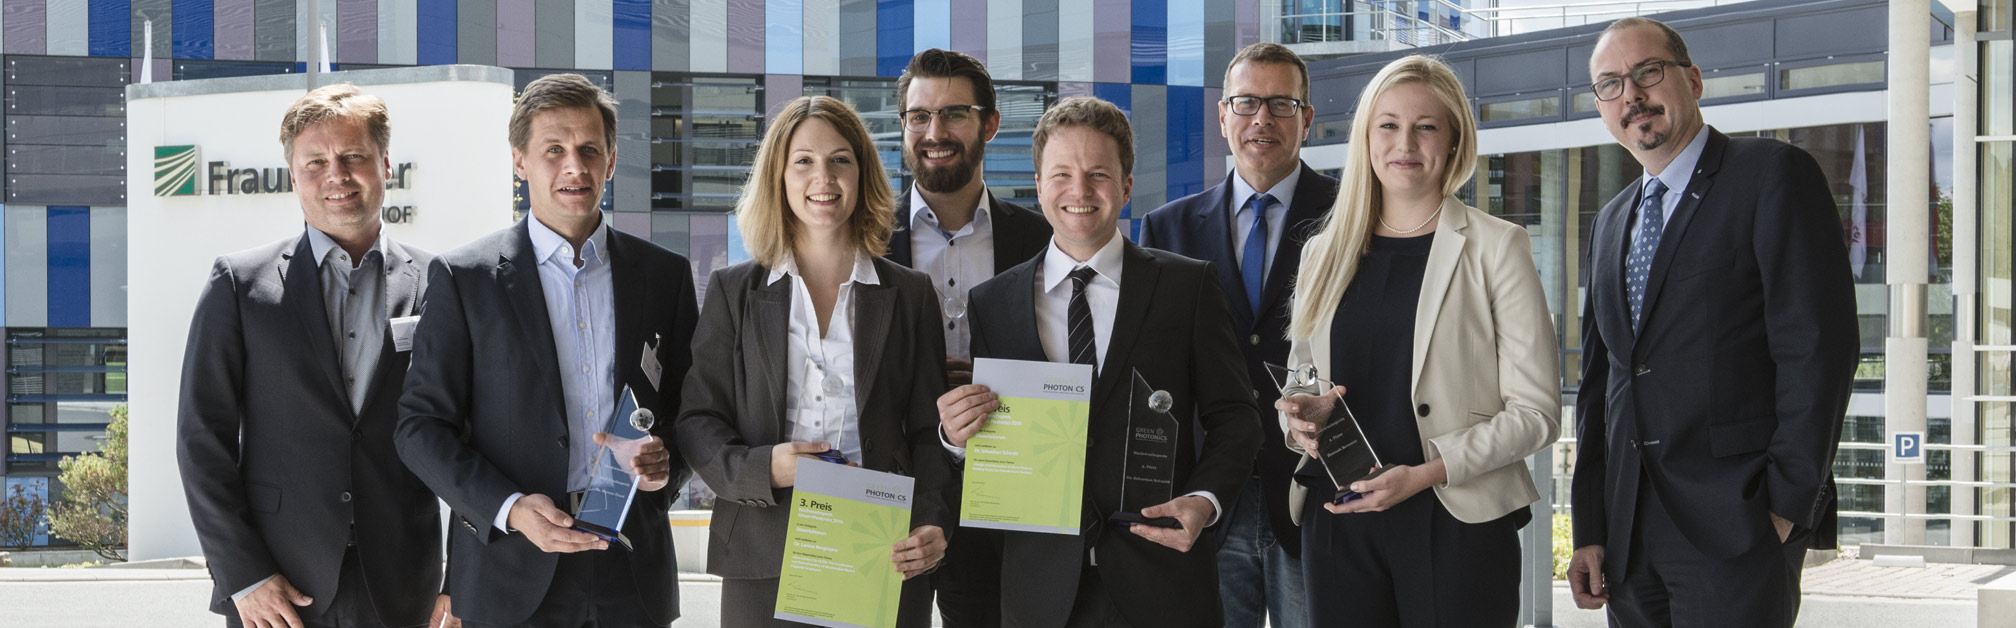 Award winners 2016 in front of the Fraunhofer IOF in Jena.